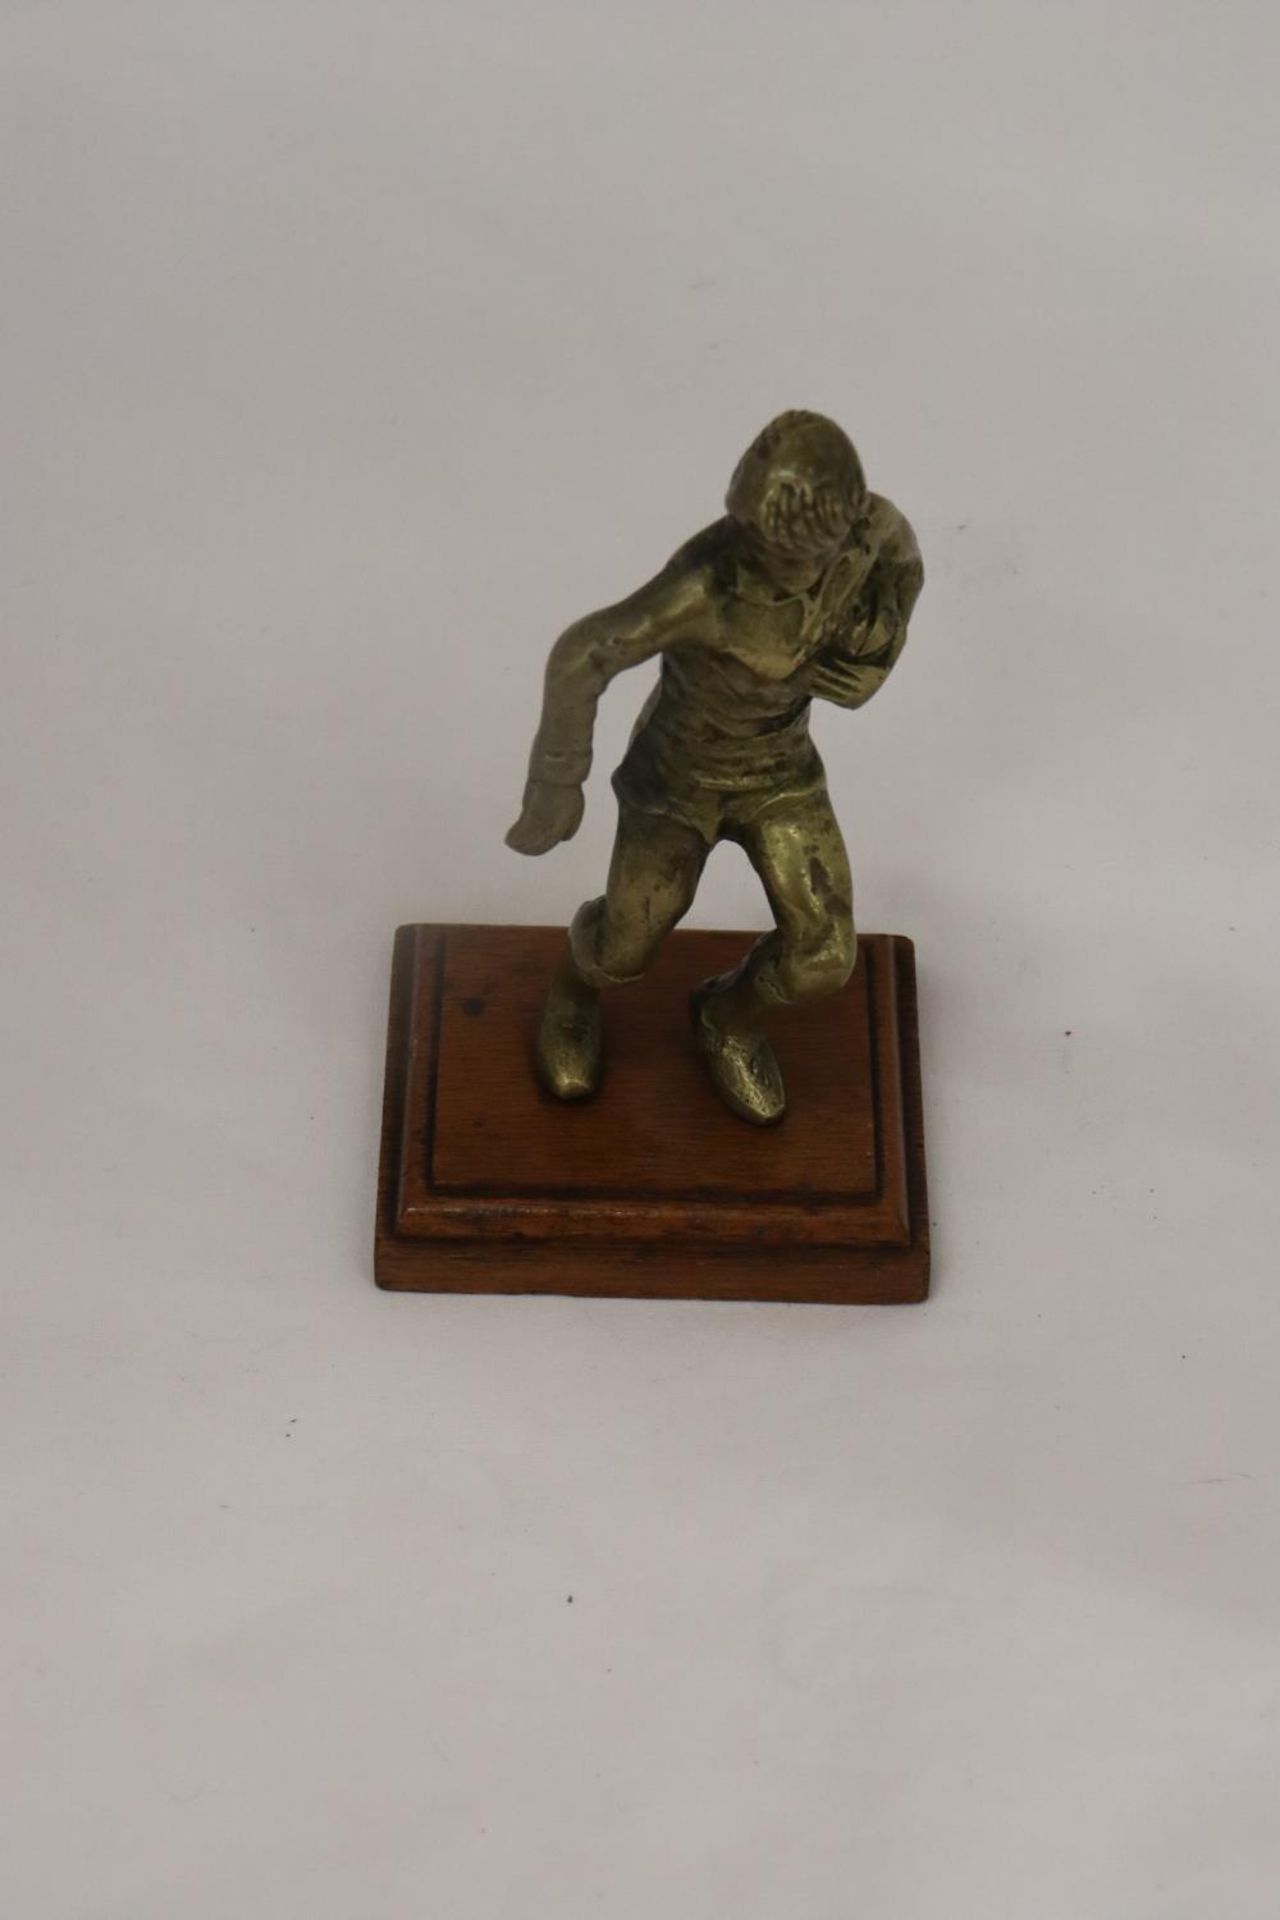 A VINTAGE BRASS RUGBY PLAYER ON A WOODEN PLINTH - Image 5 of 5